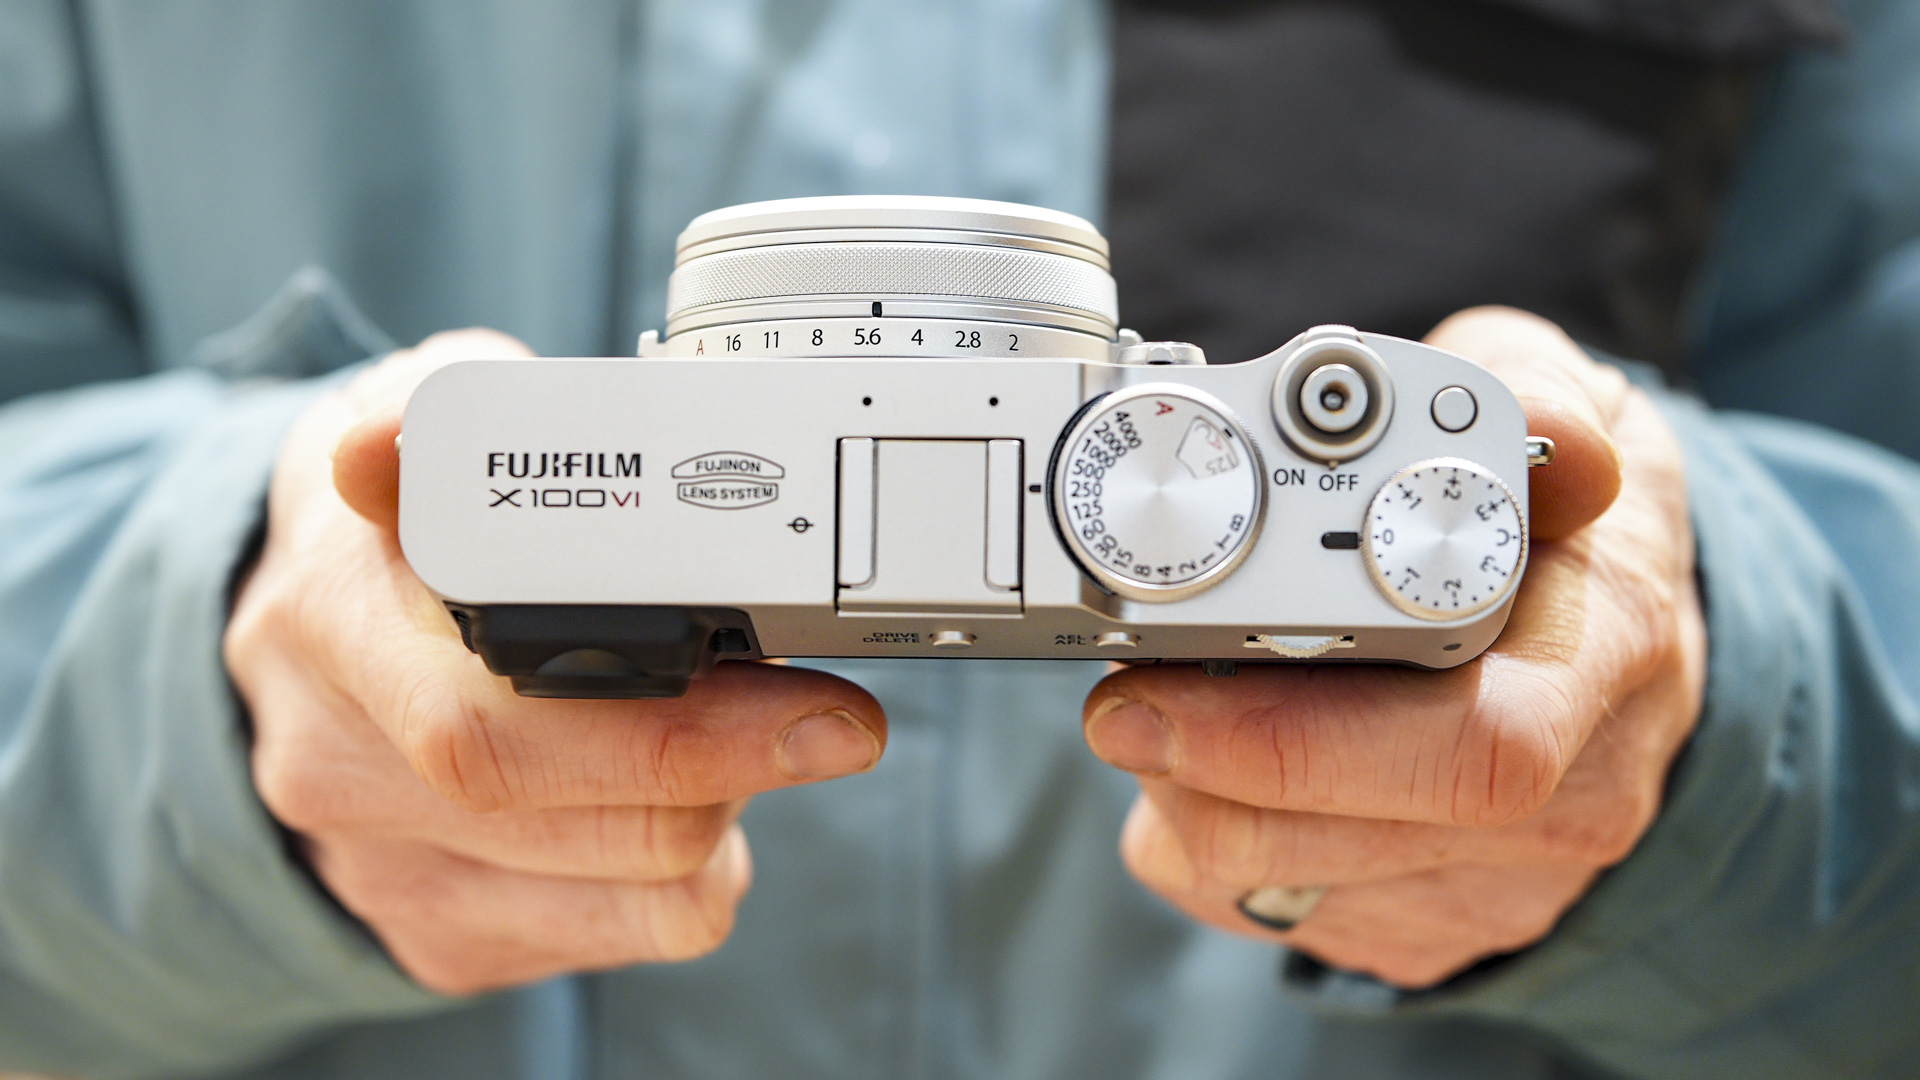 Fujifilm X100VI in the hand with top plate in view